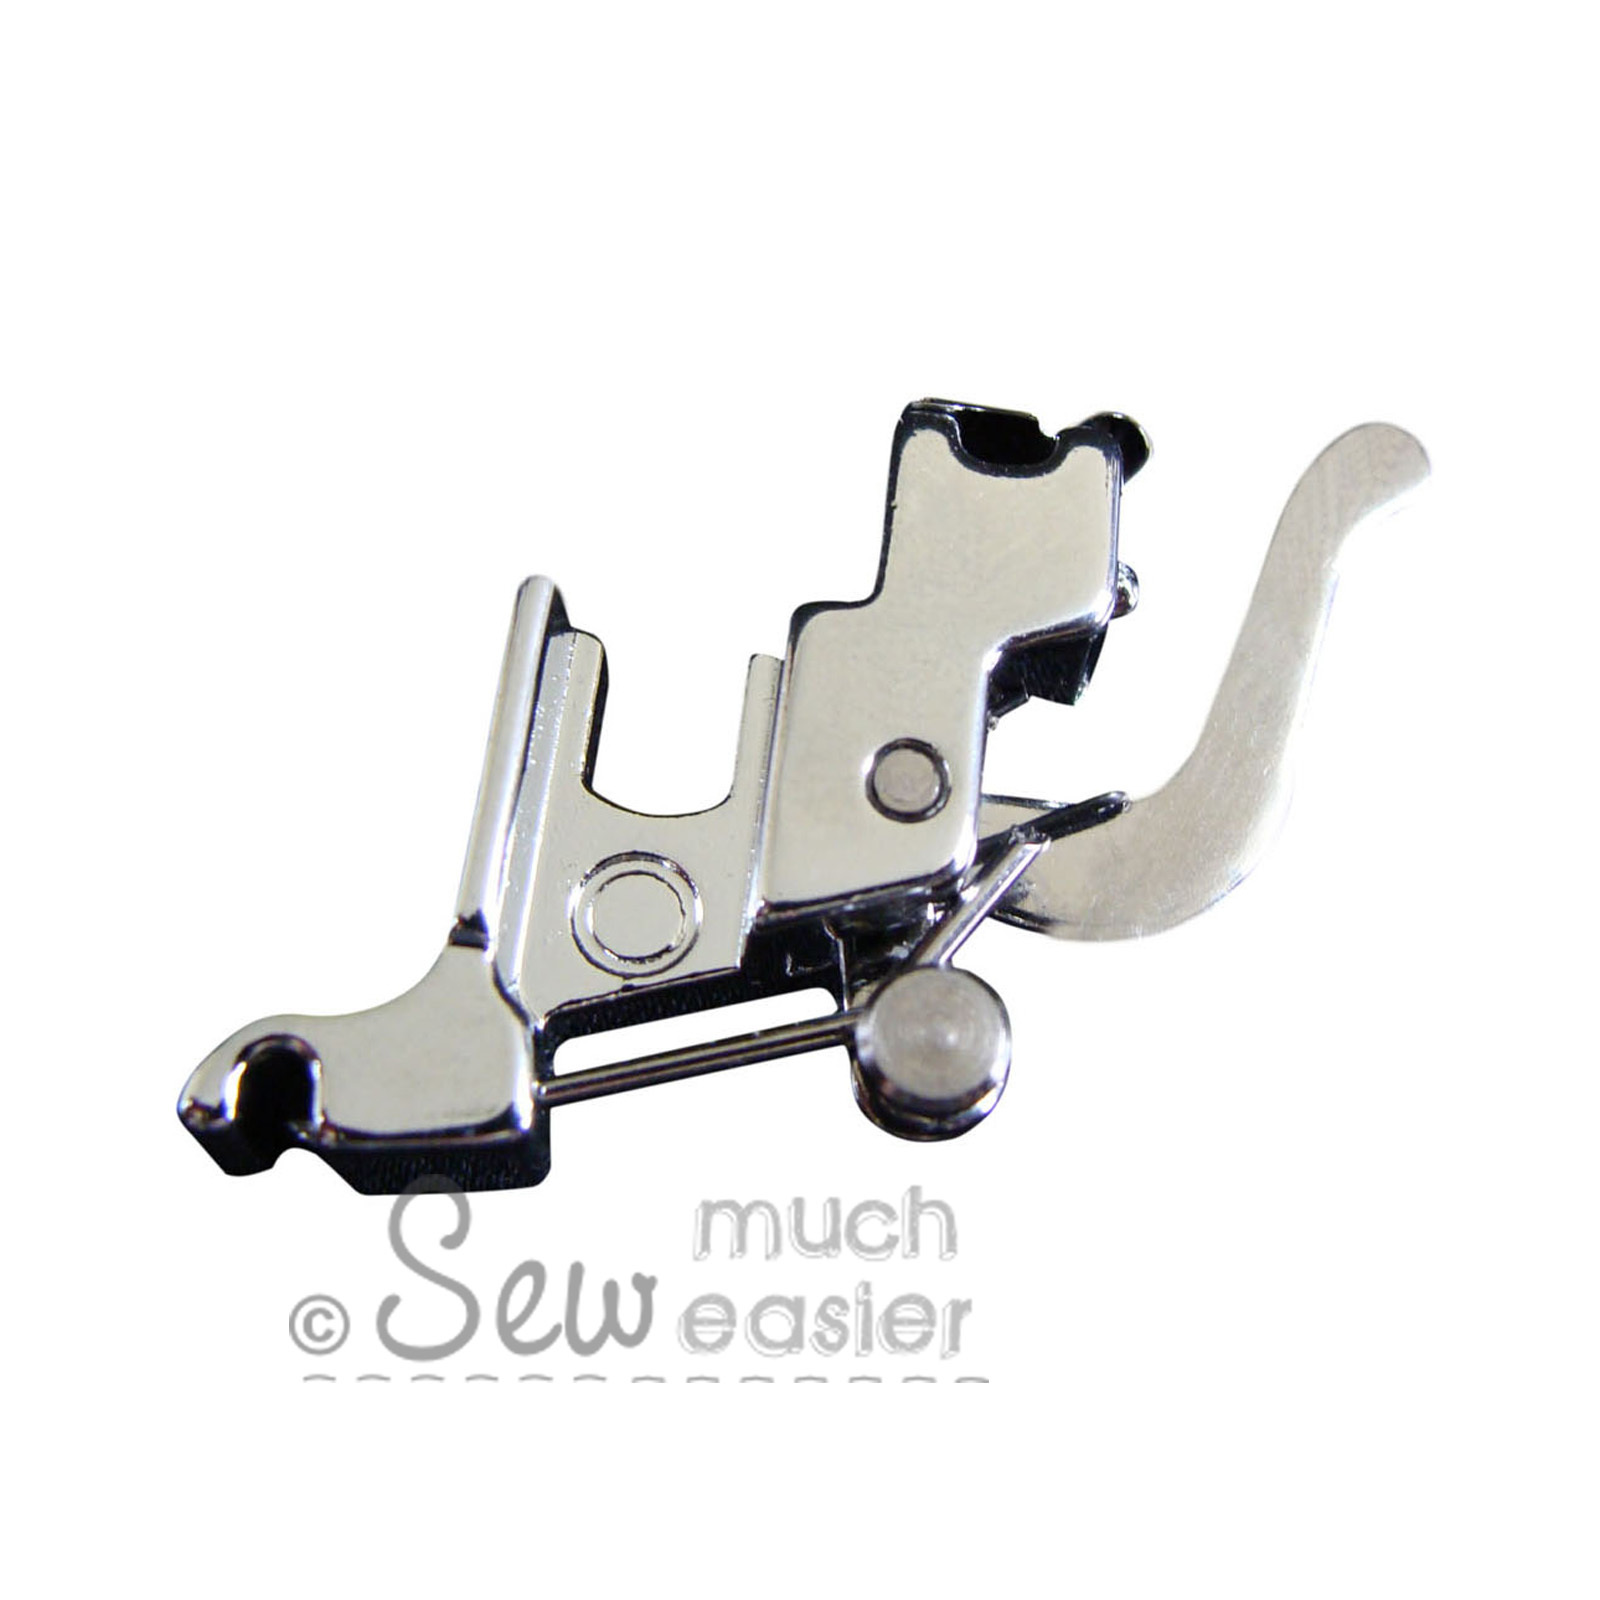 Adapter Holder B Wn Sewing Machine Presser Foot Low Shank Snap on 7300L 5011-1 